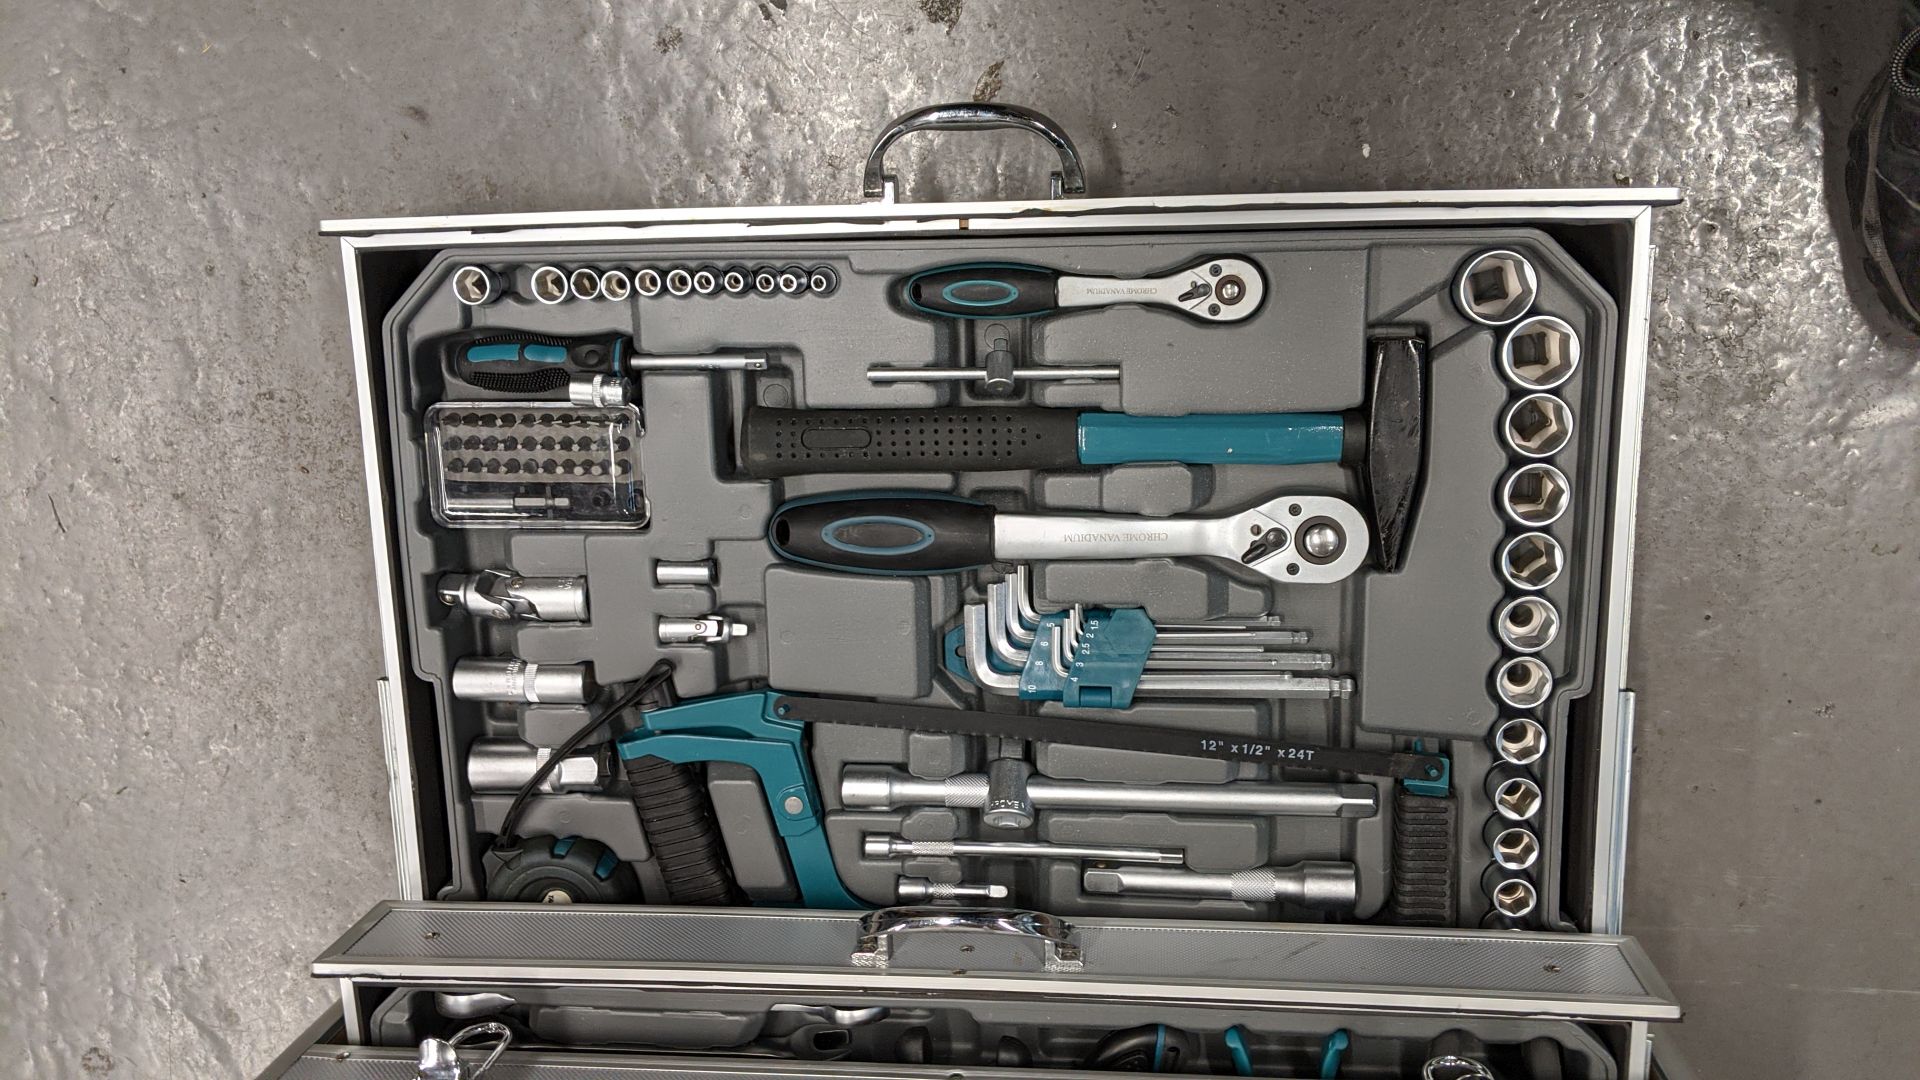 Silverline metal tool chest and contents which includes cordless drill and torch with battery and - Image 8 of 15